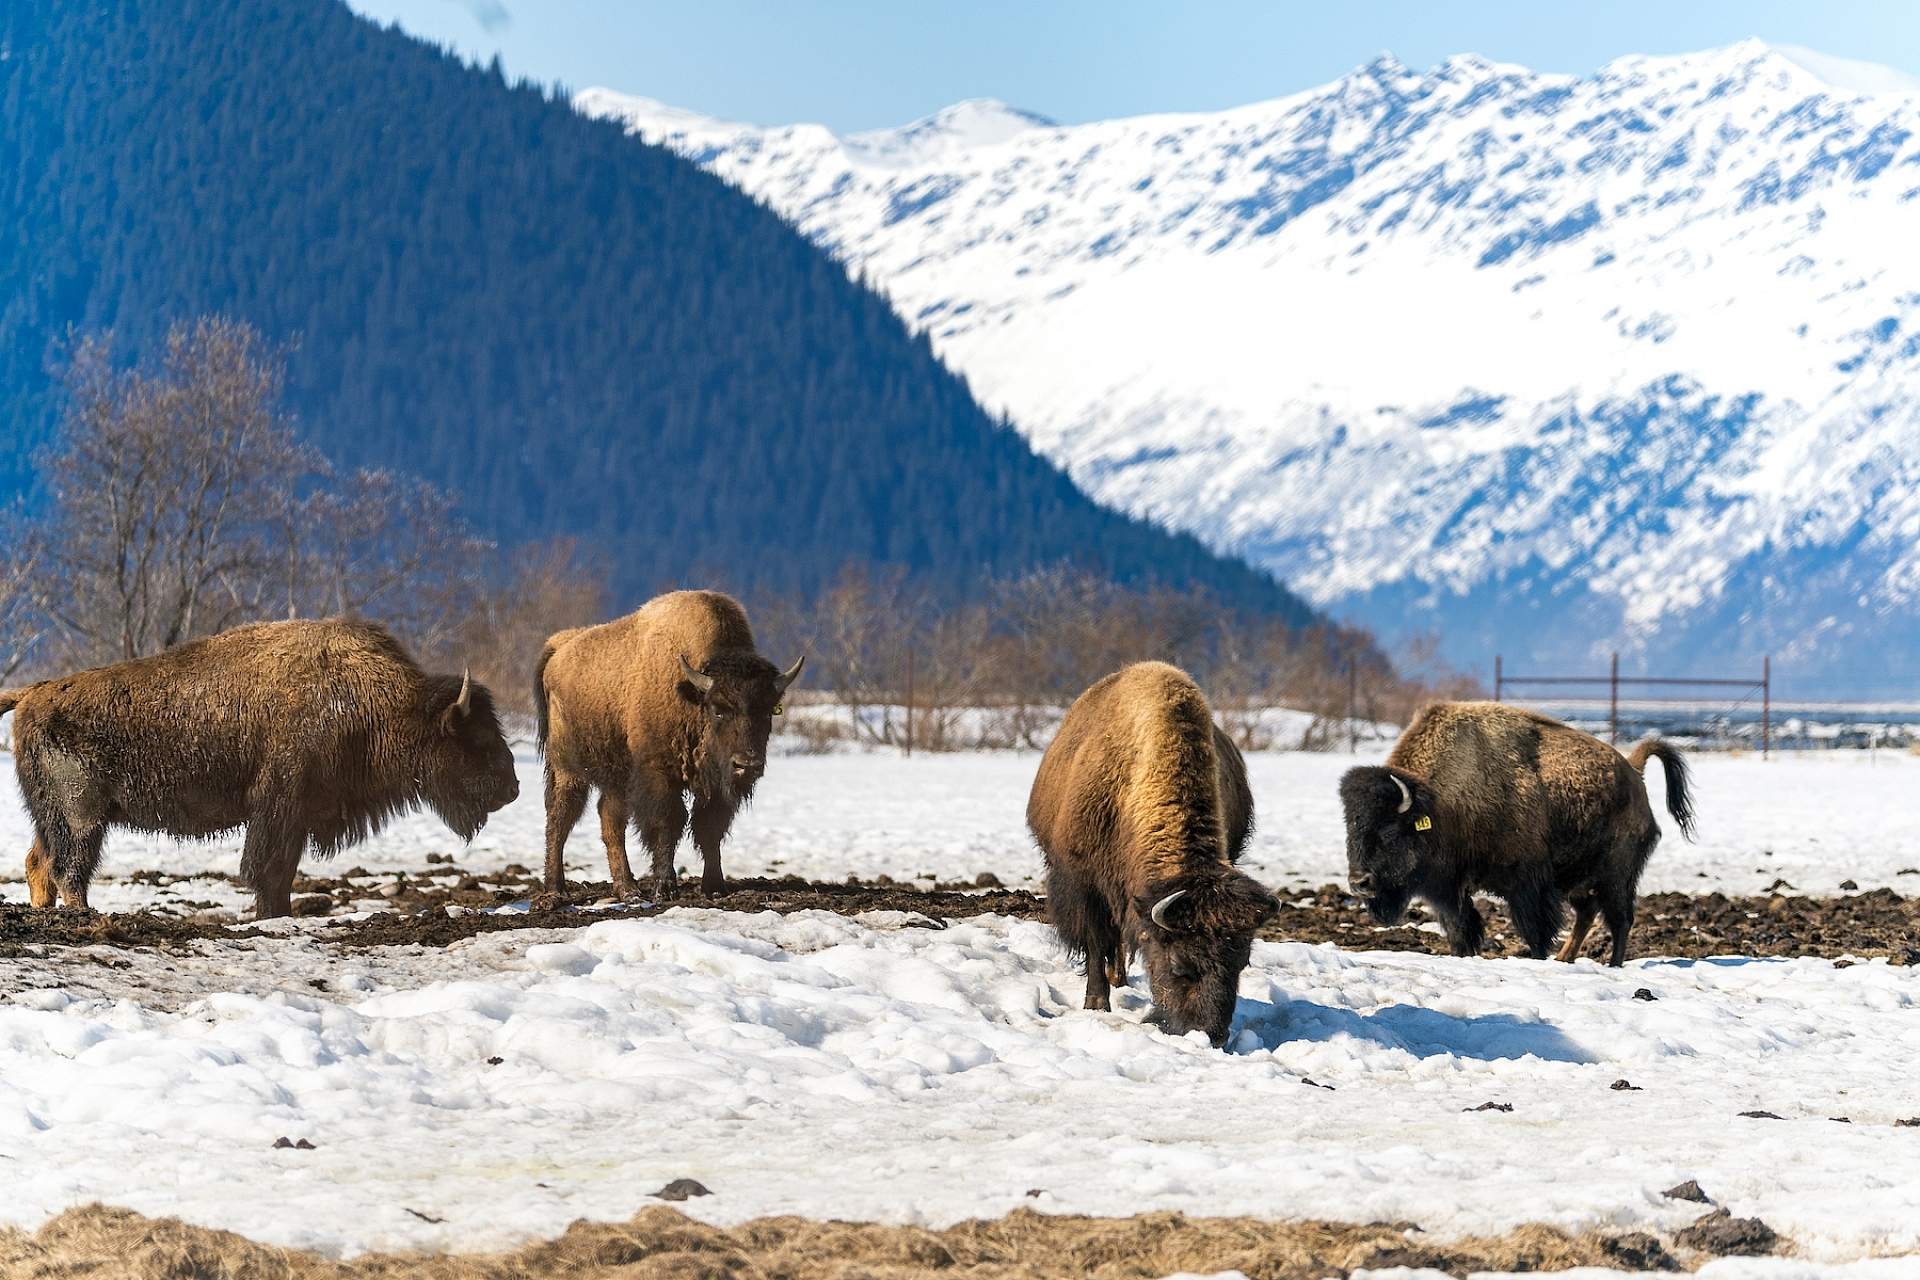 A herd of bison graze in the snow at the Alaska Wildlife Conservation Center